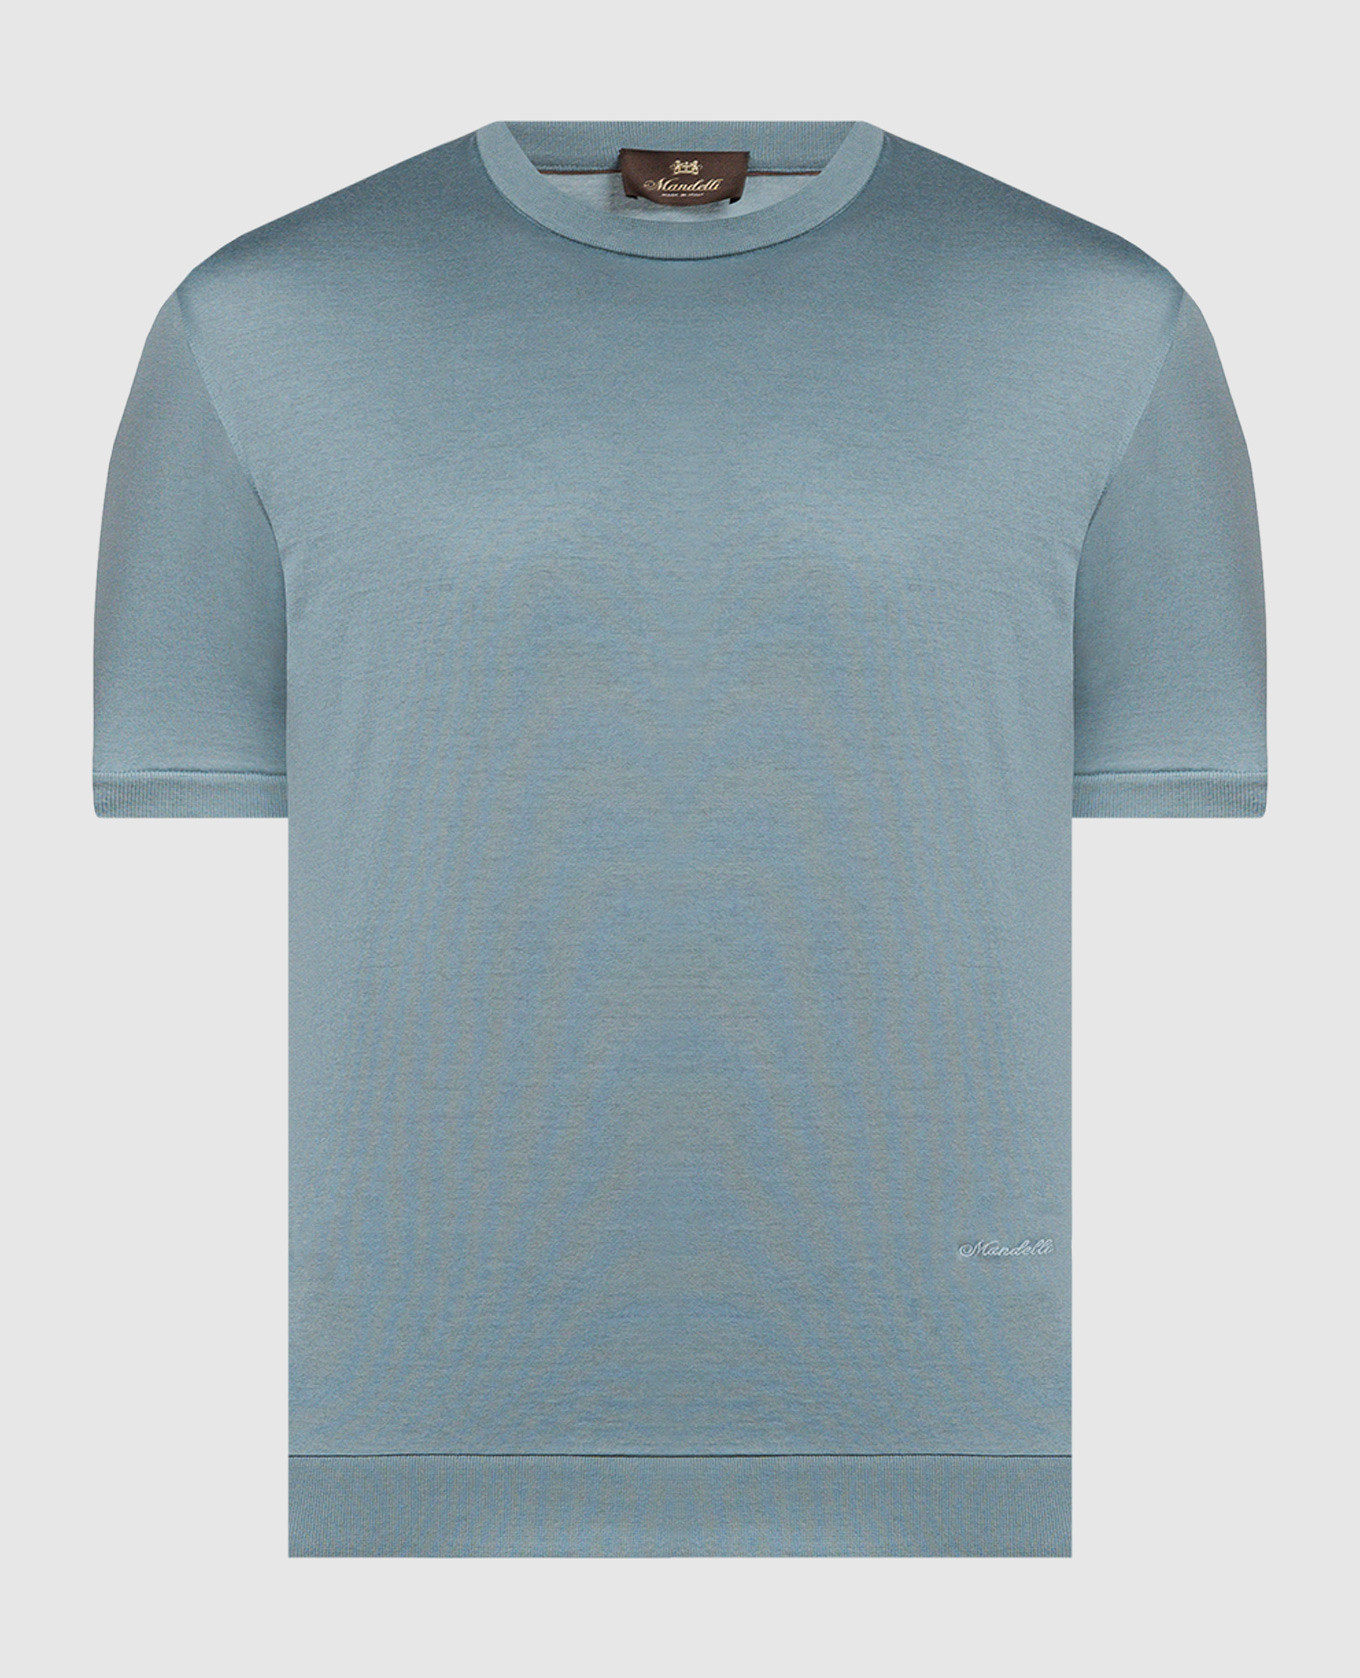 Blue t-shirt with logo embroidery